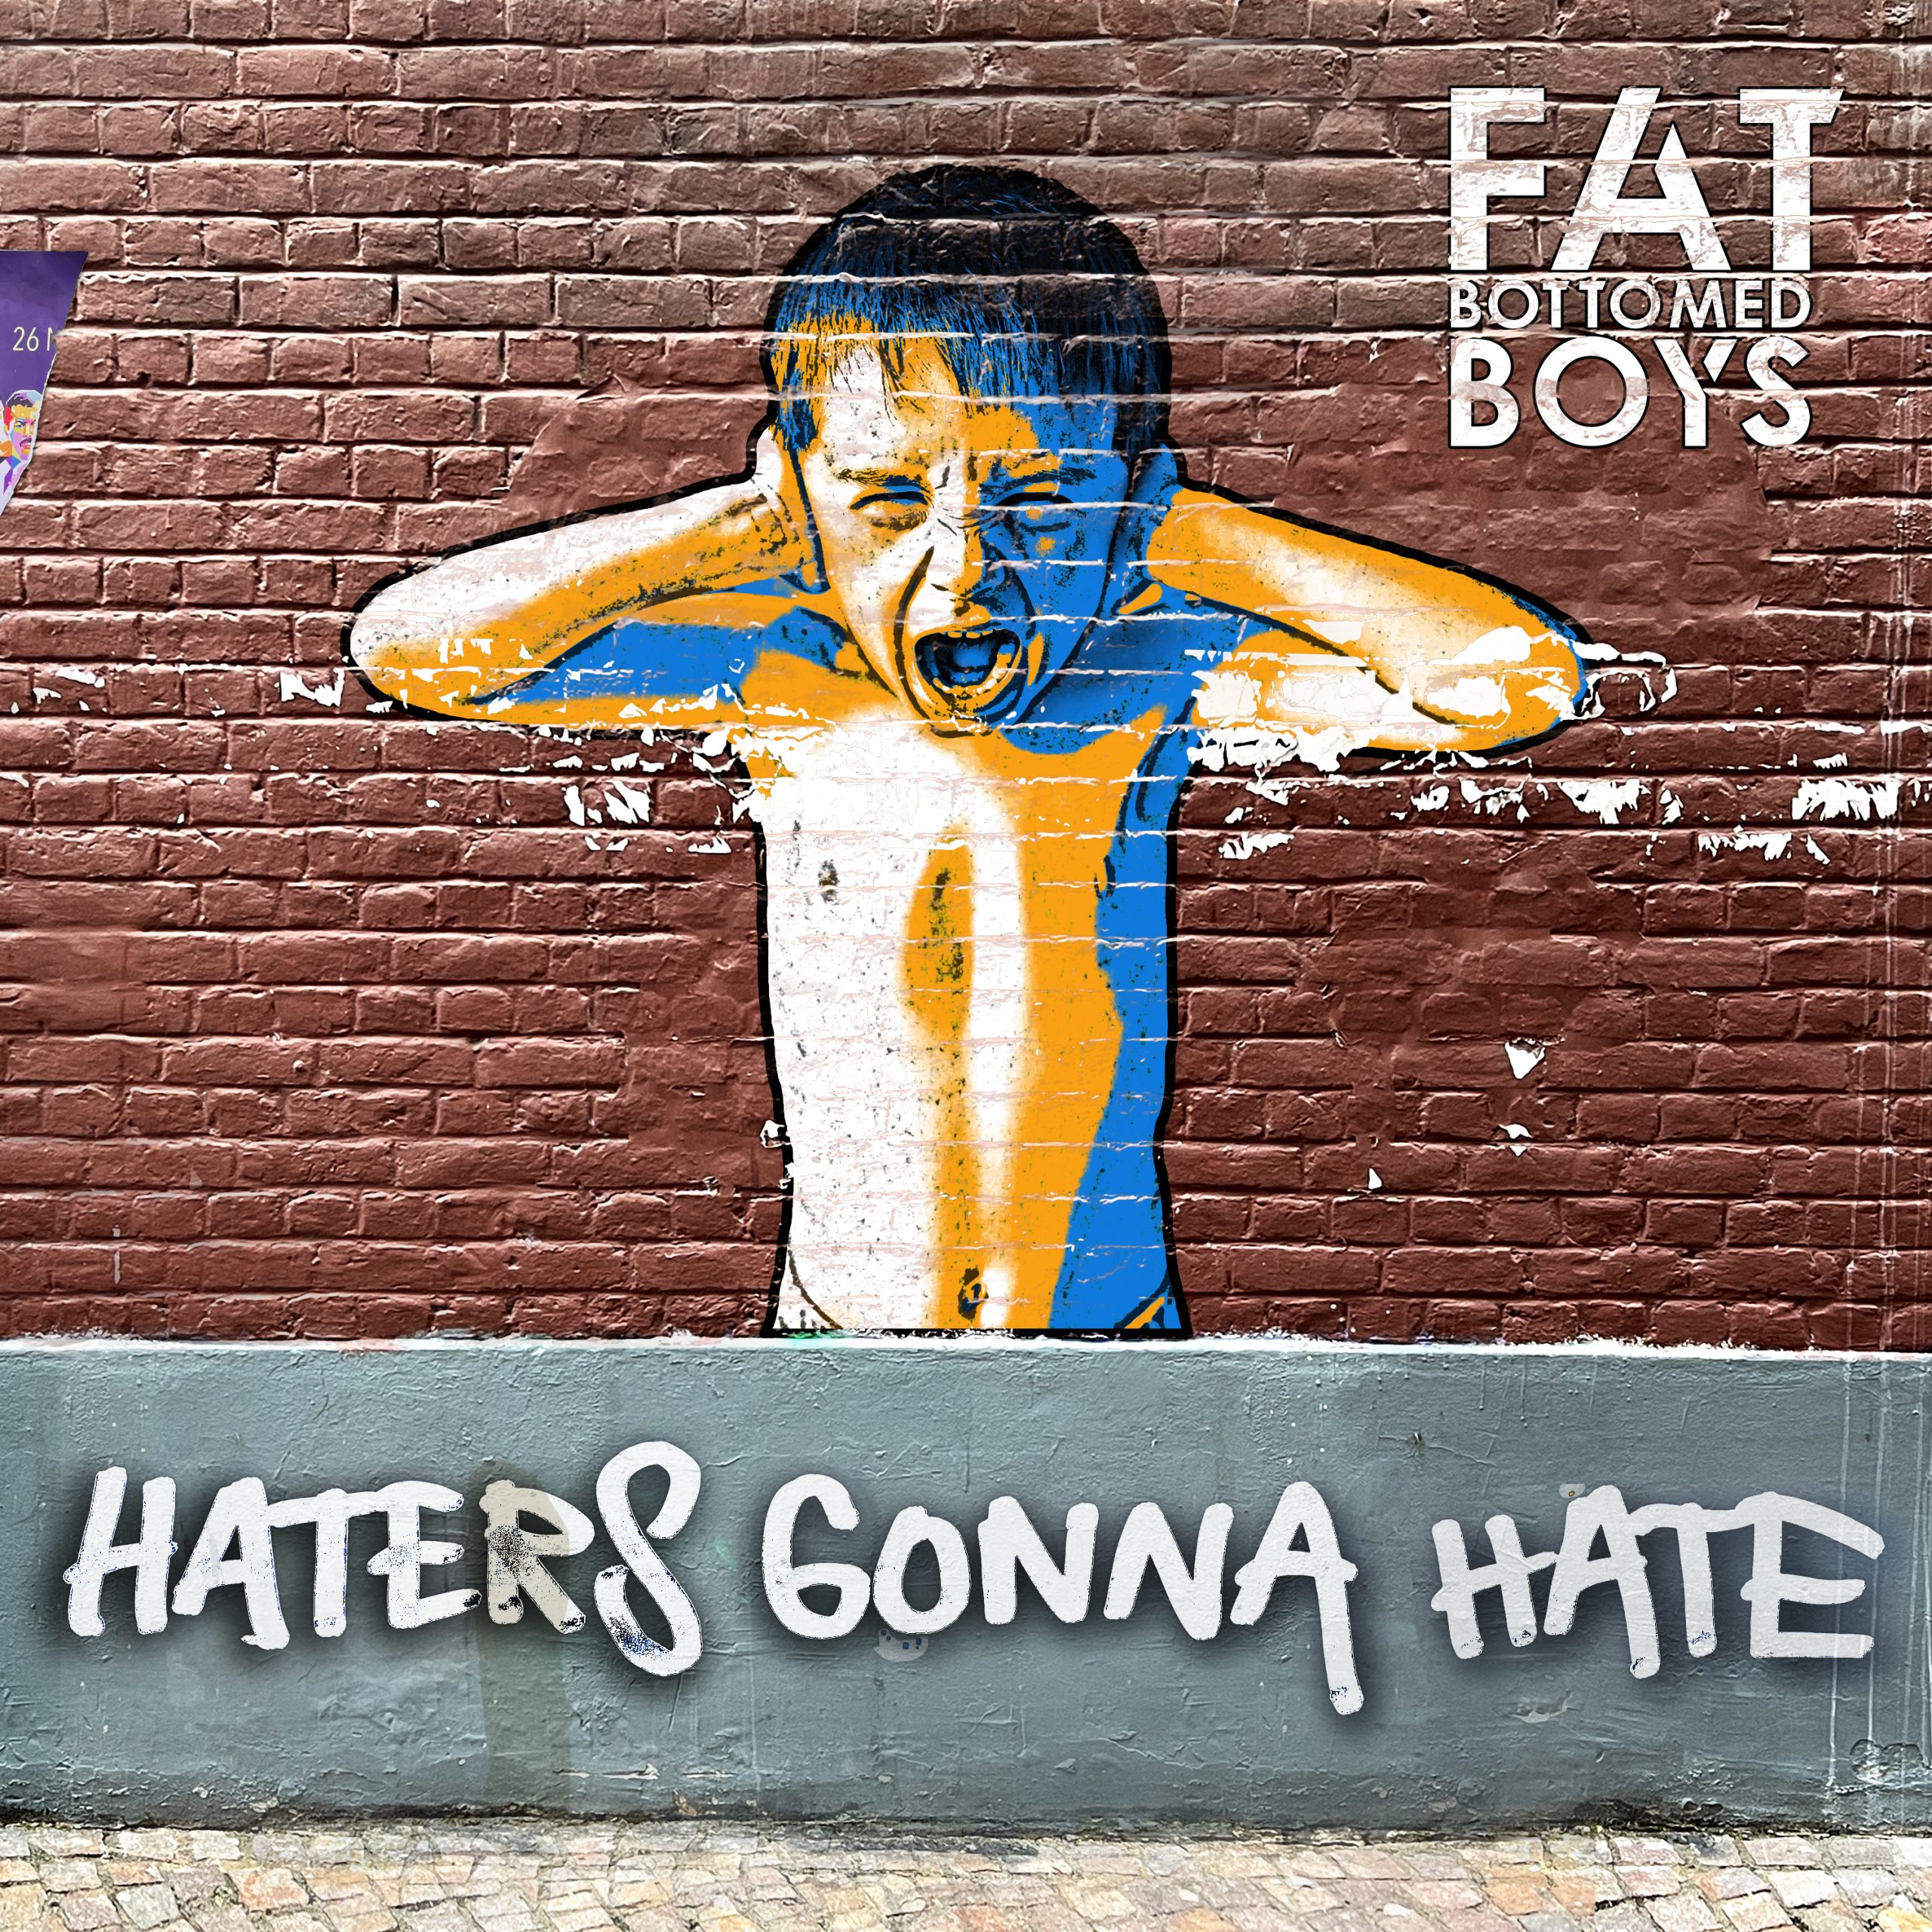 L'album Haters Gonna Hate (MP3) – Fat Bottomed Boys